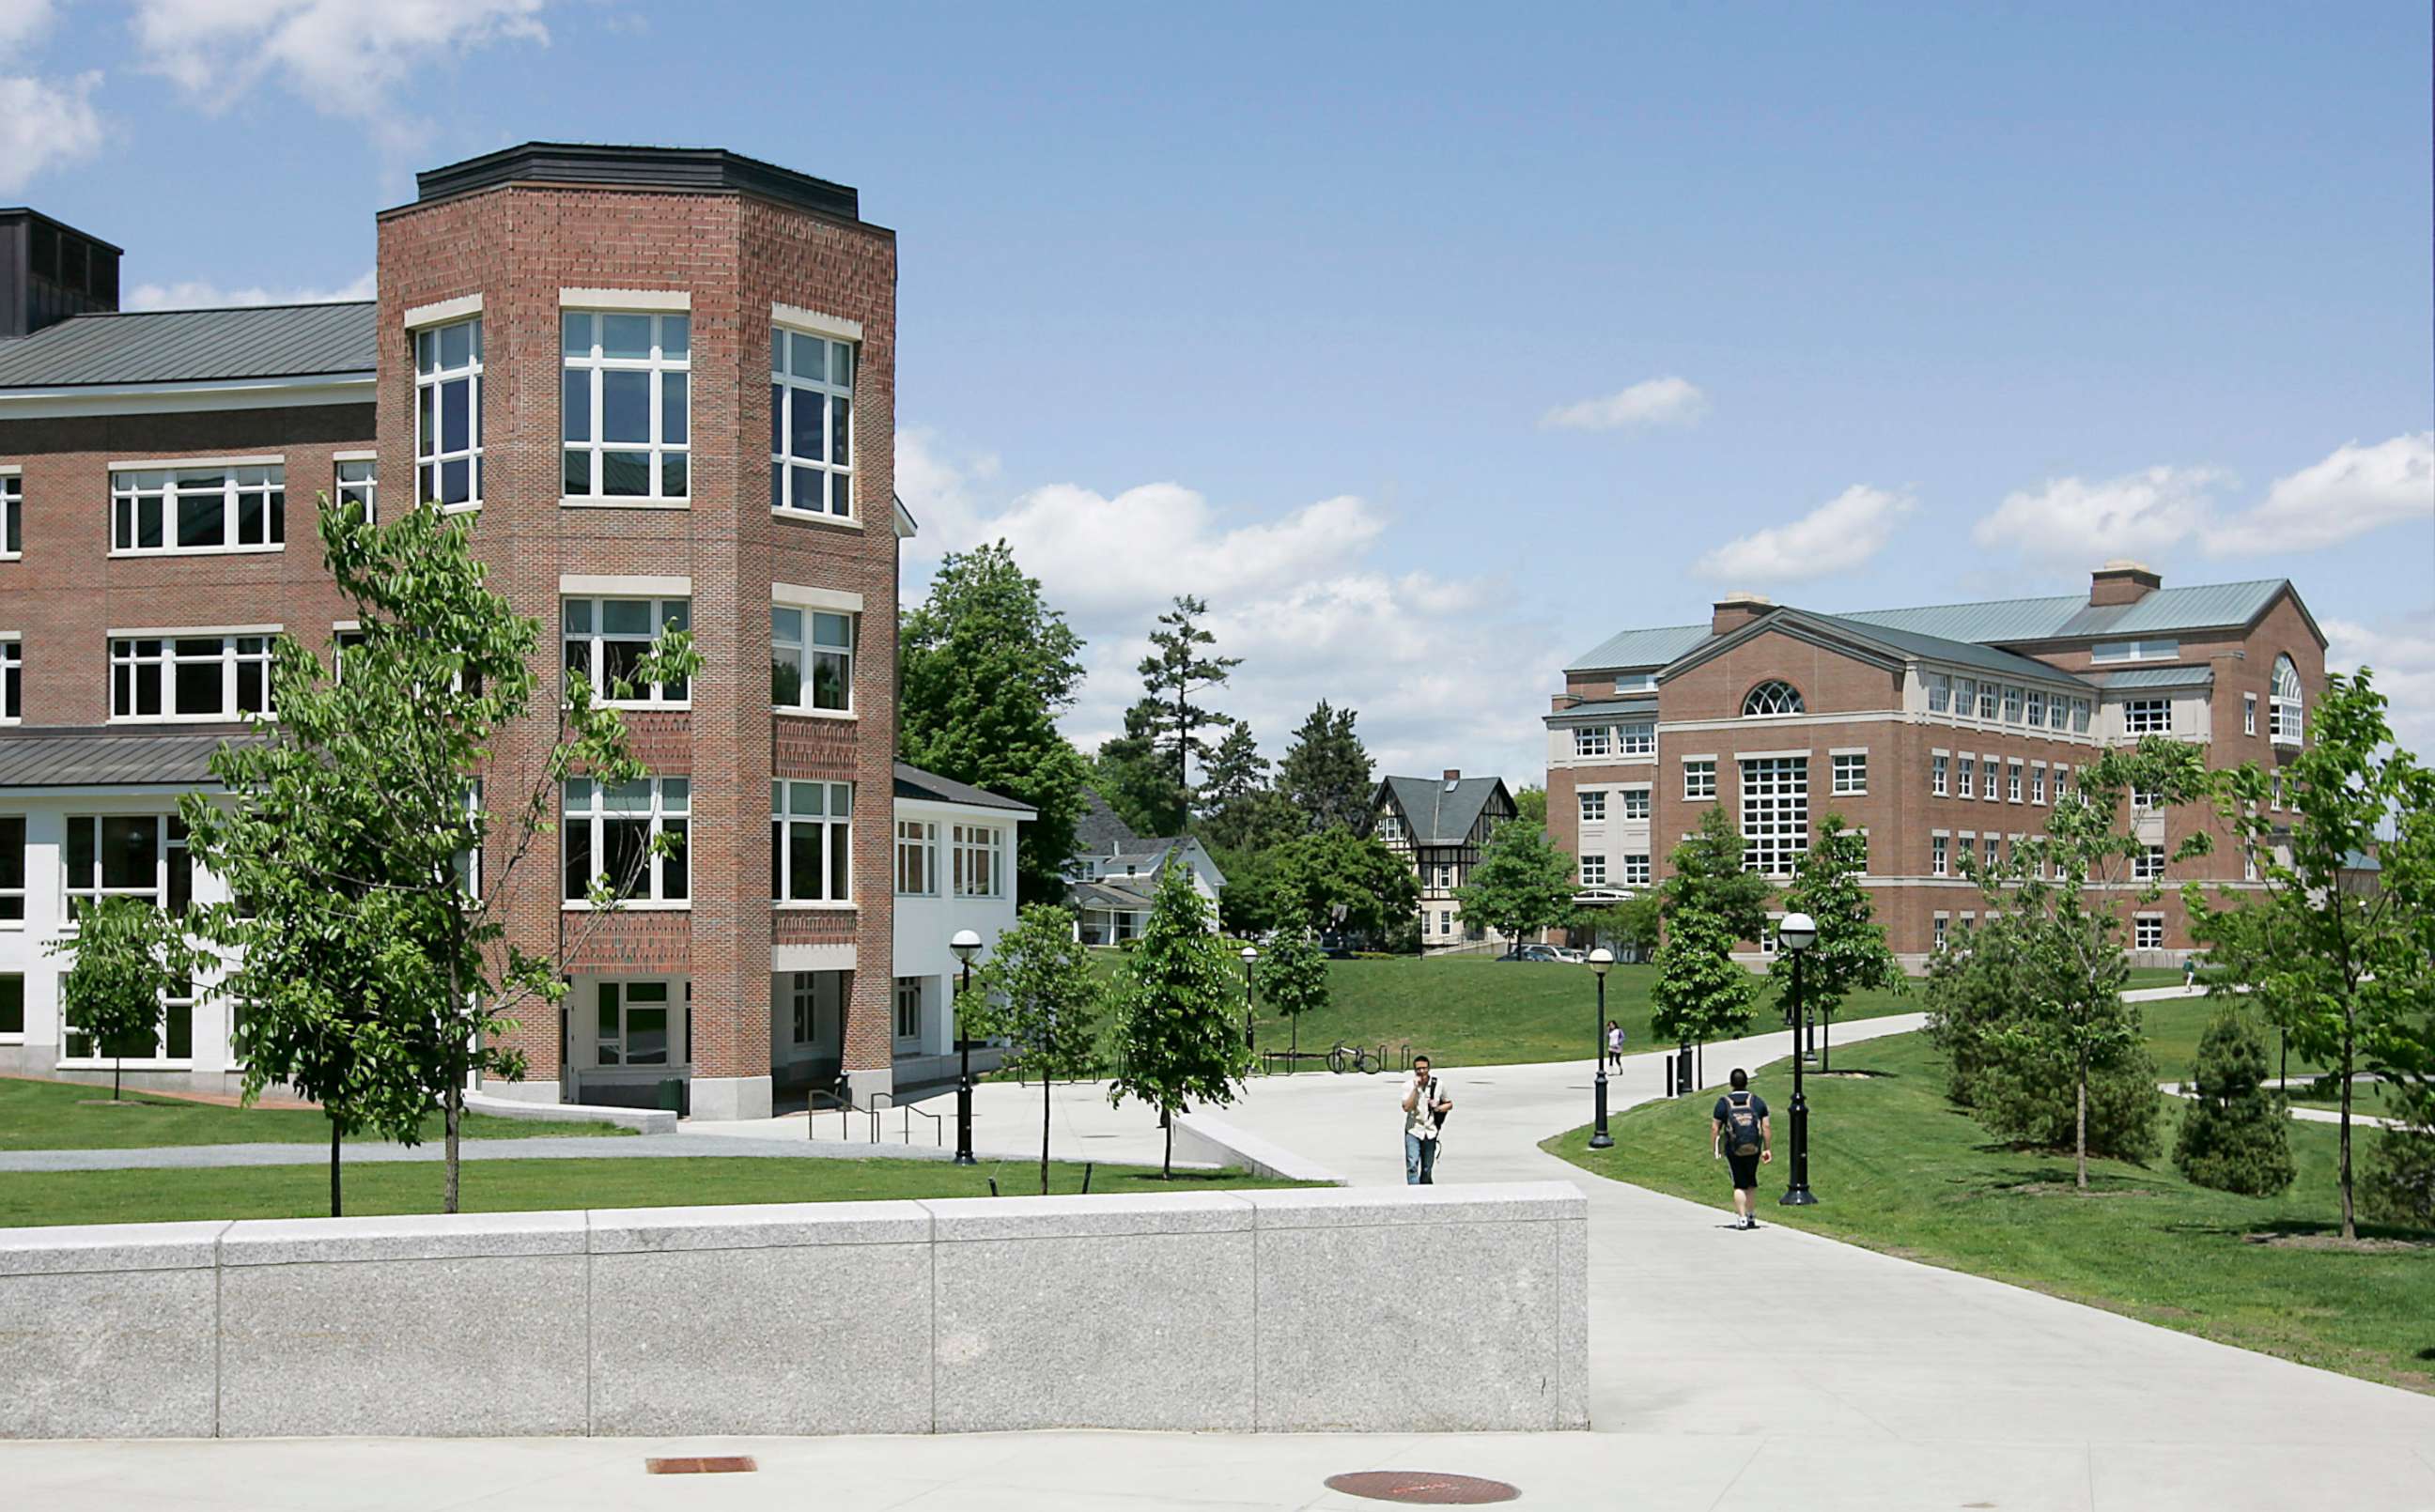 PHOTO: The Kemeny building, left, and Moore building stand on the campus of Dartmouth College in Hanover, New Hampshire, June 2, 2009.